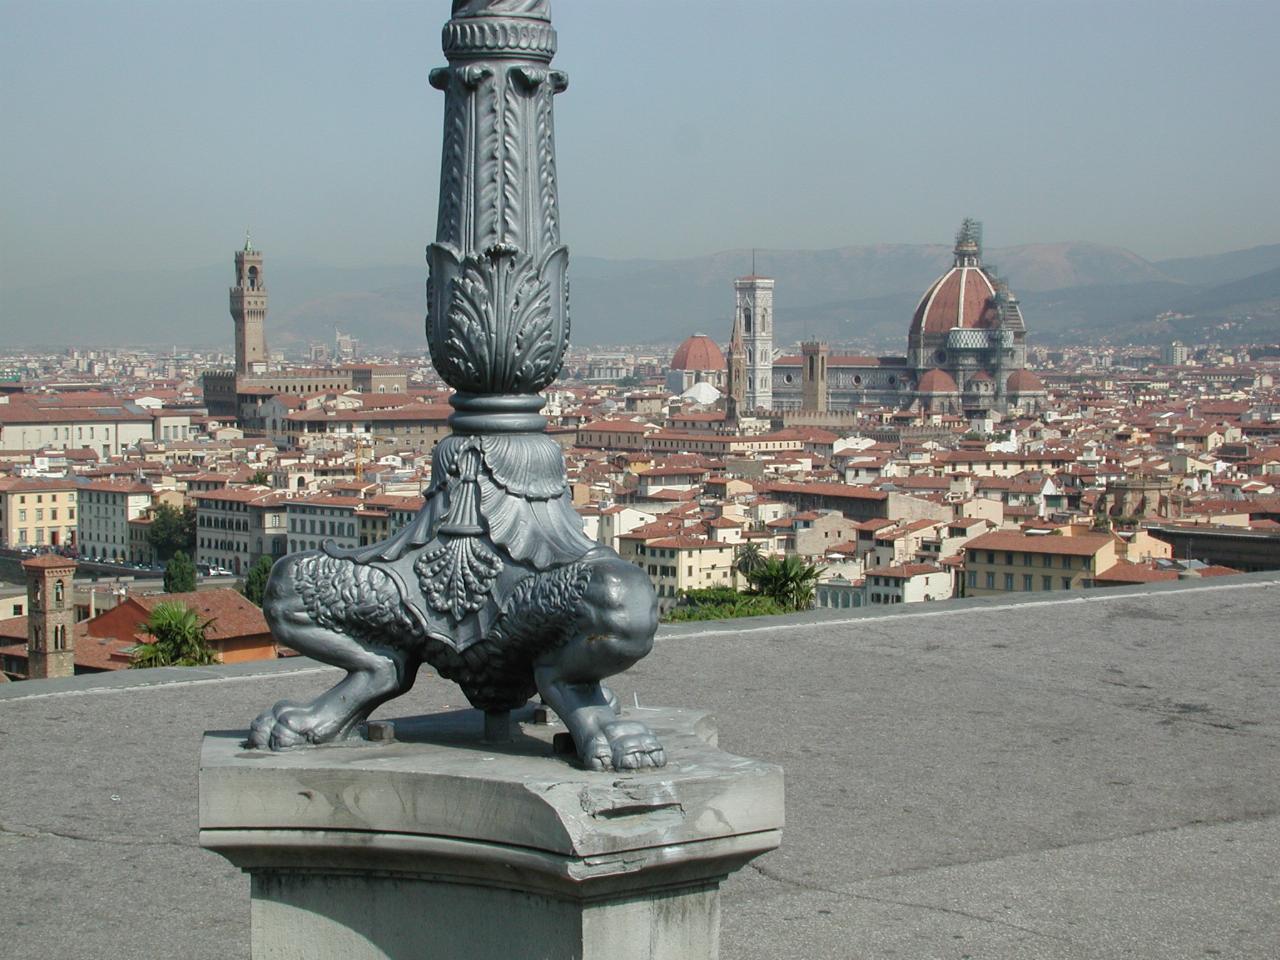 Interesting lamp post design, with view over Florence from Piazzale Michelangelo